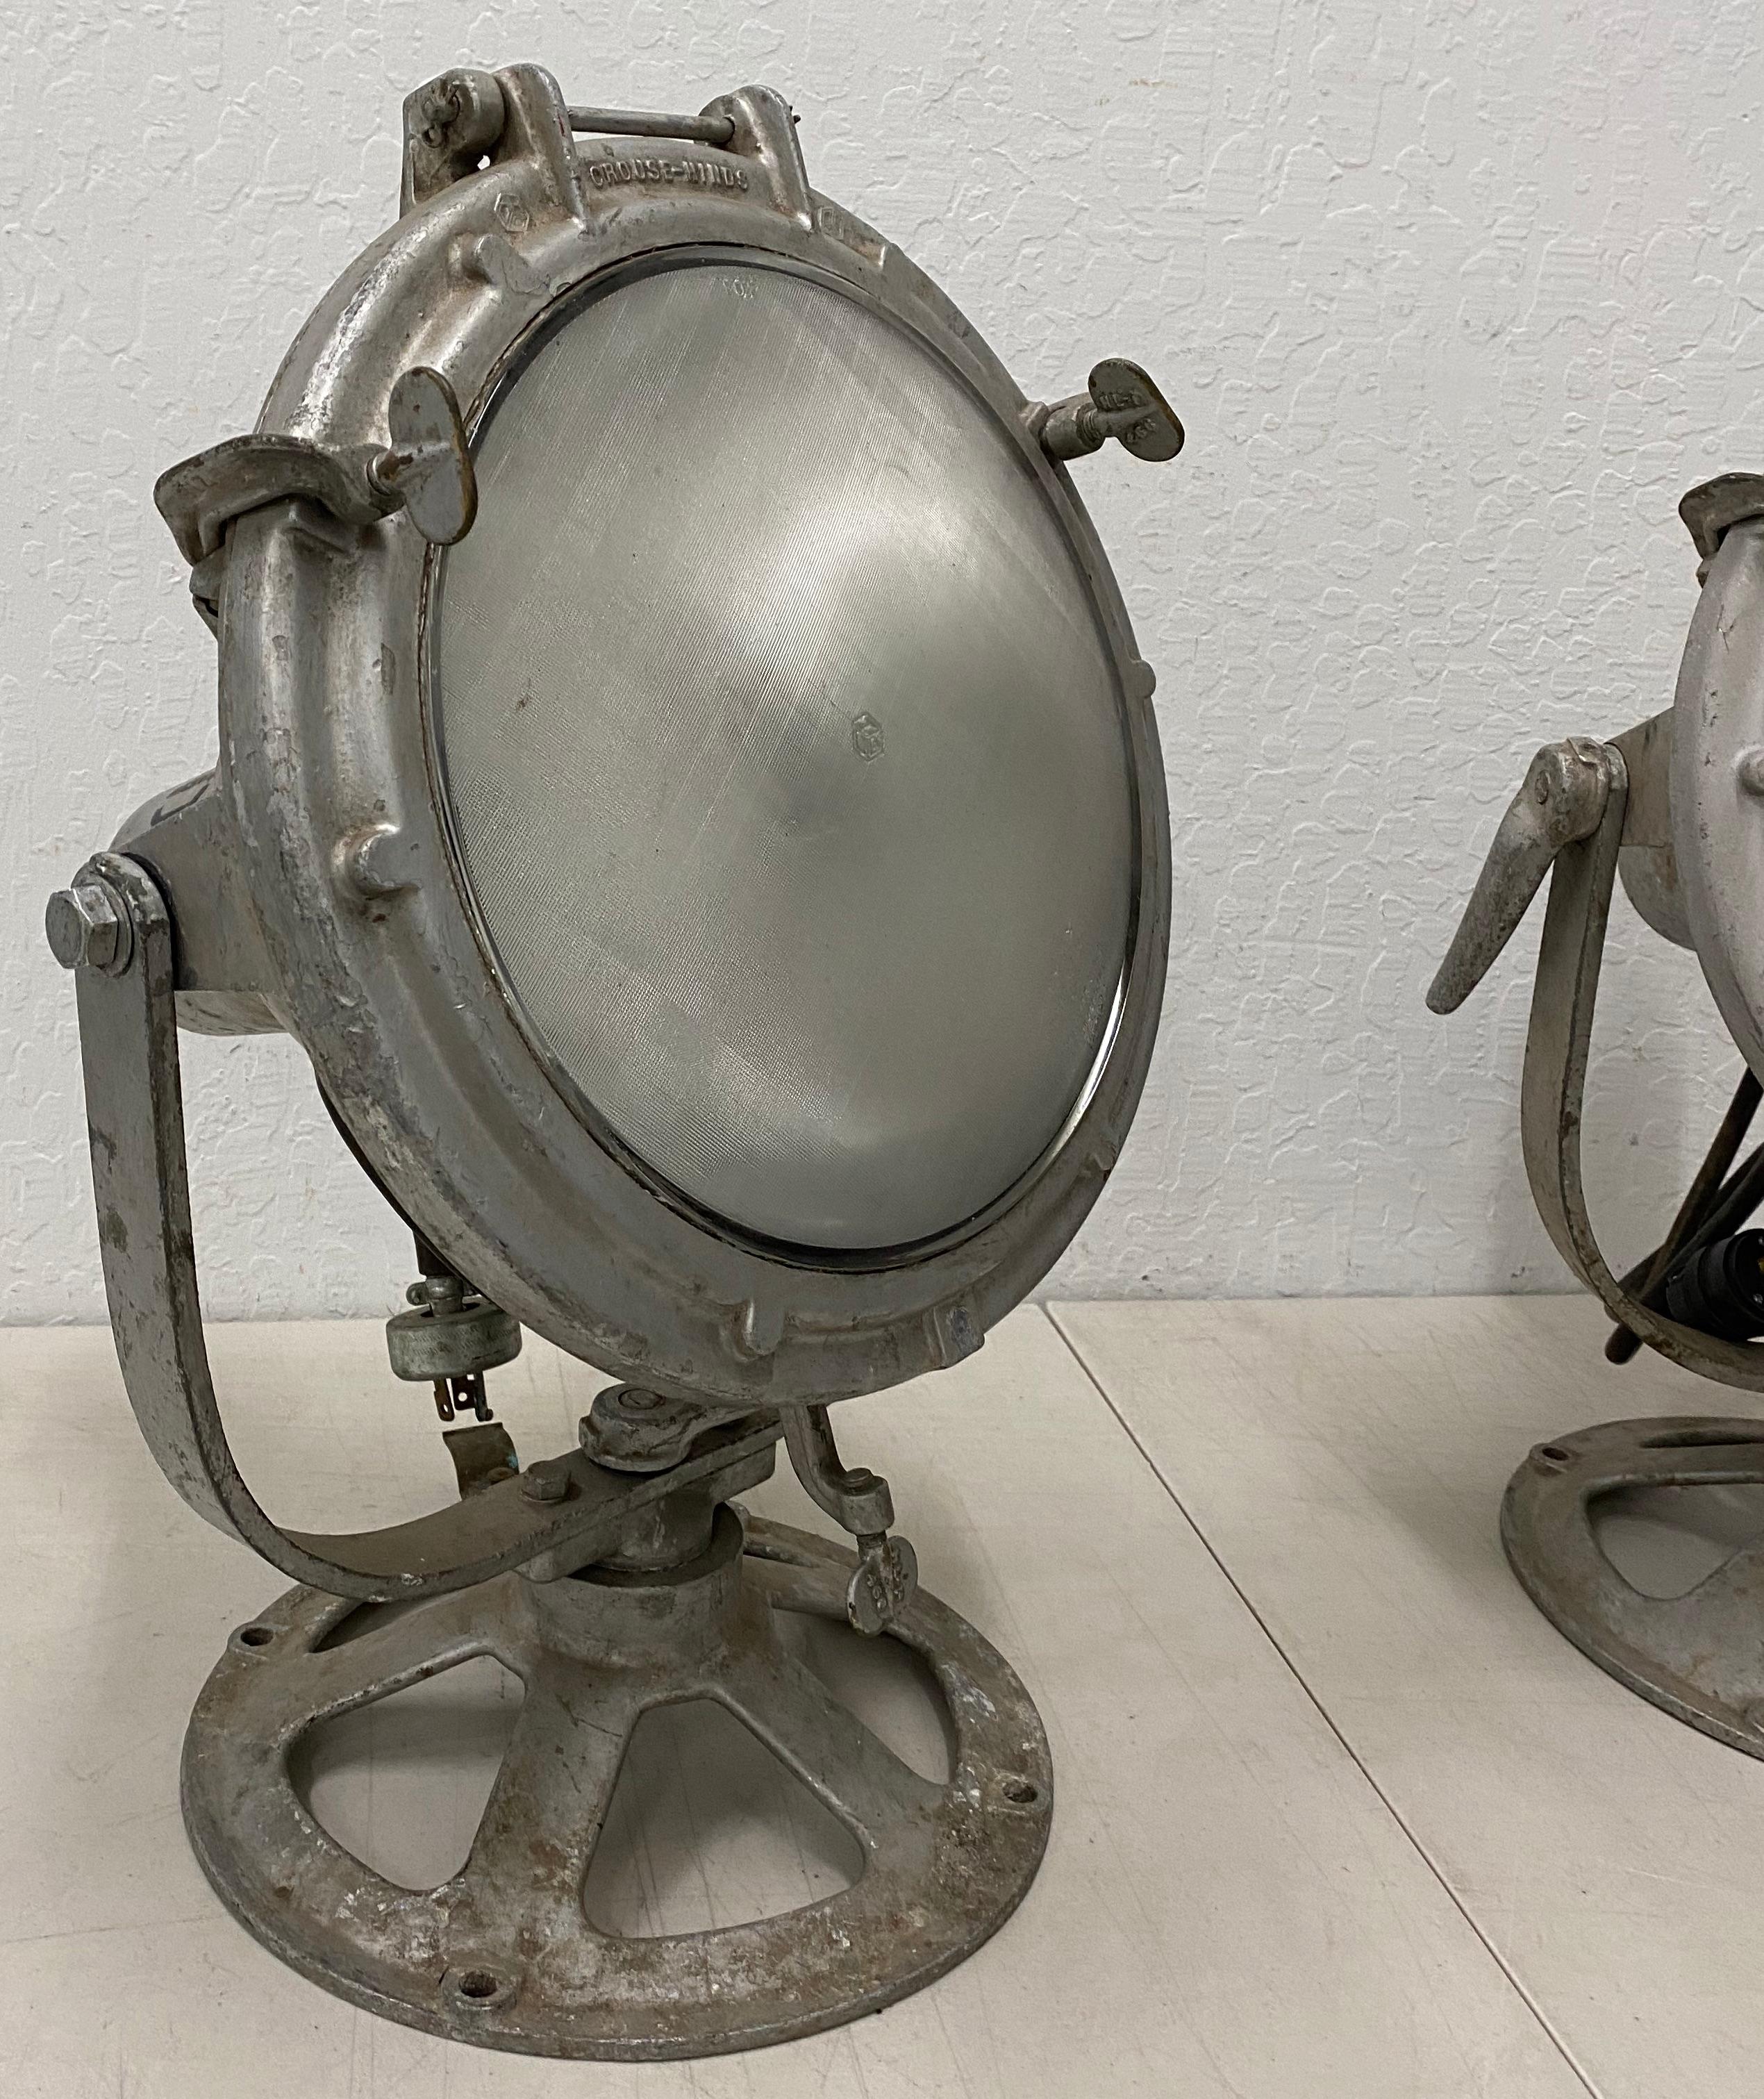 Pair of vintage Crouse-Hinds nautical searchlights, circa 1930

Matching pair of nautical spotlights

Not tested for use

Have them rewired by a professional for home use

Each light measures 14.5